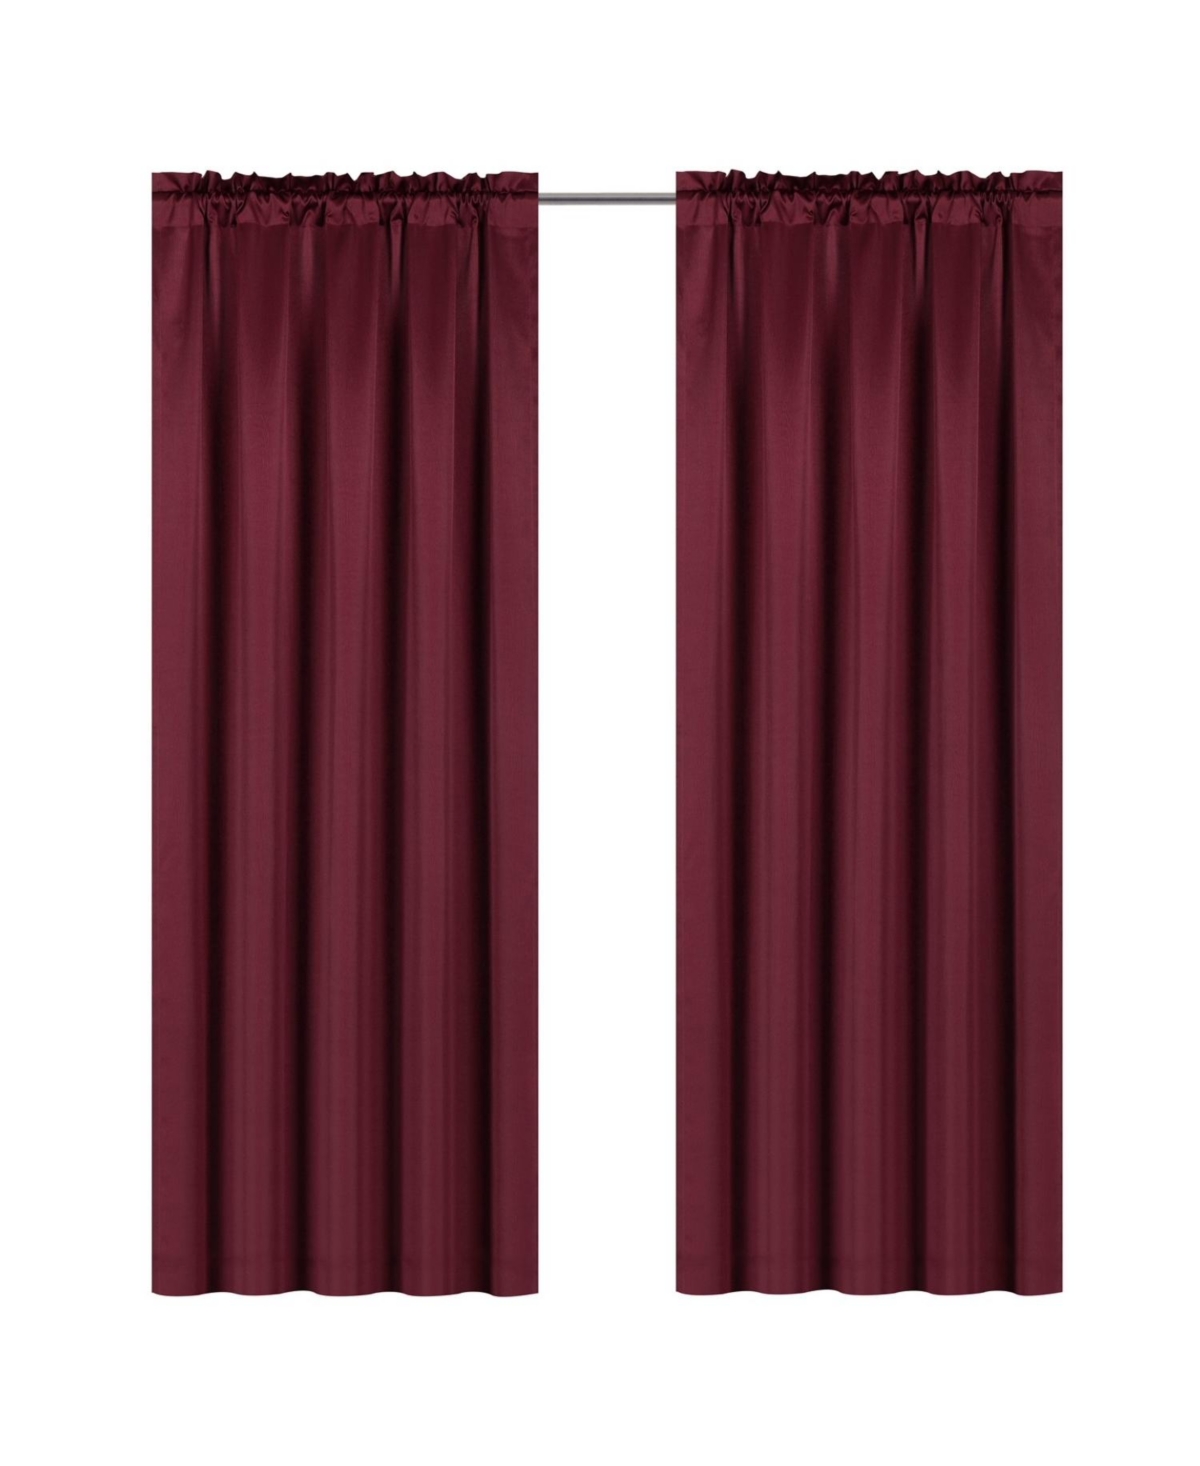 Lux Living Complete 9 Piece Semi Sheer Rod Pocket Window Curtain & Valance Set - All burgundy